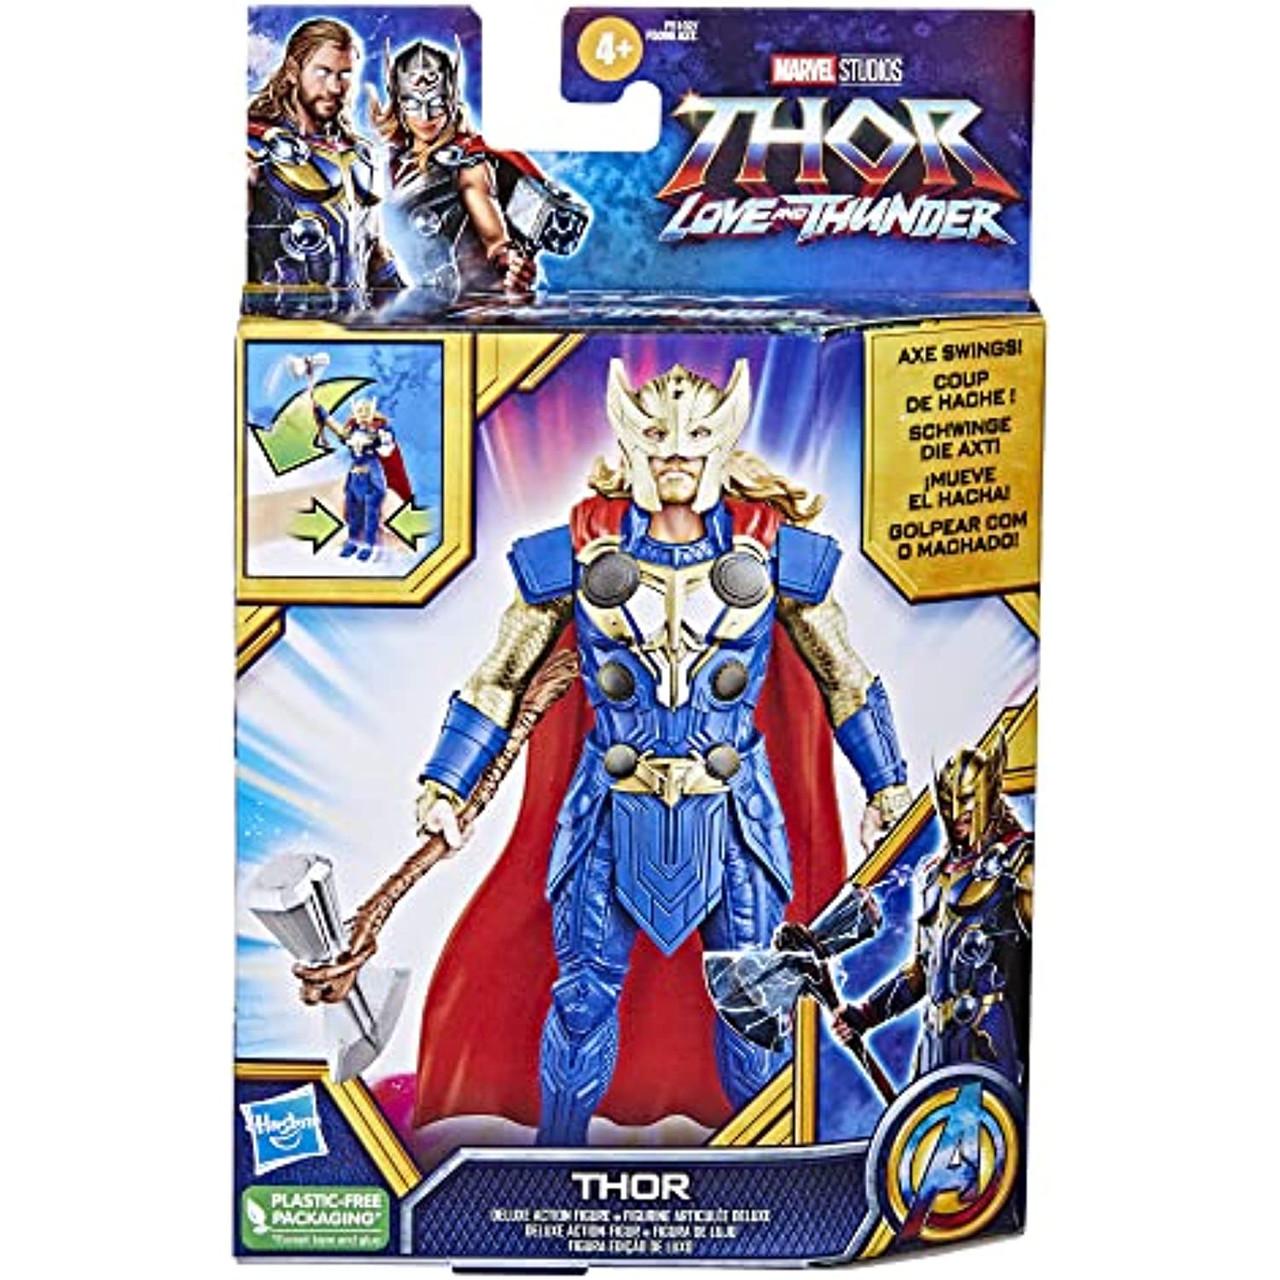  Marvel Thor Legends Series 6-inch Thor : Toys & Games